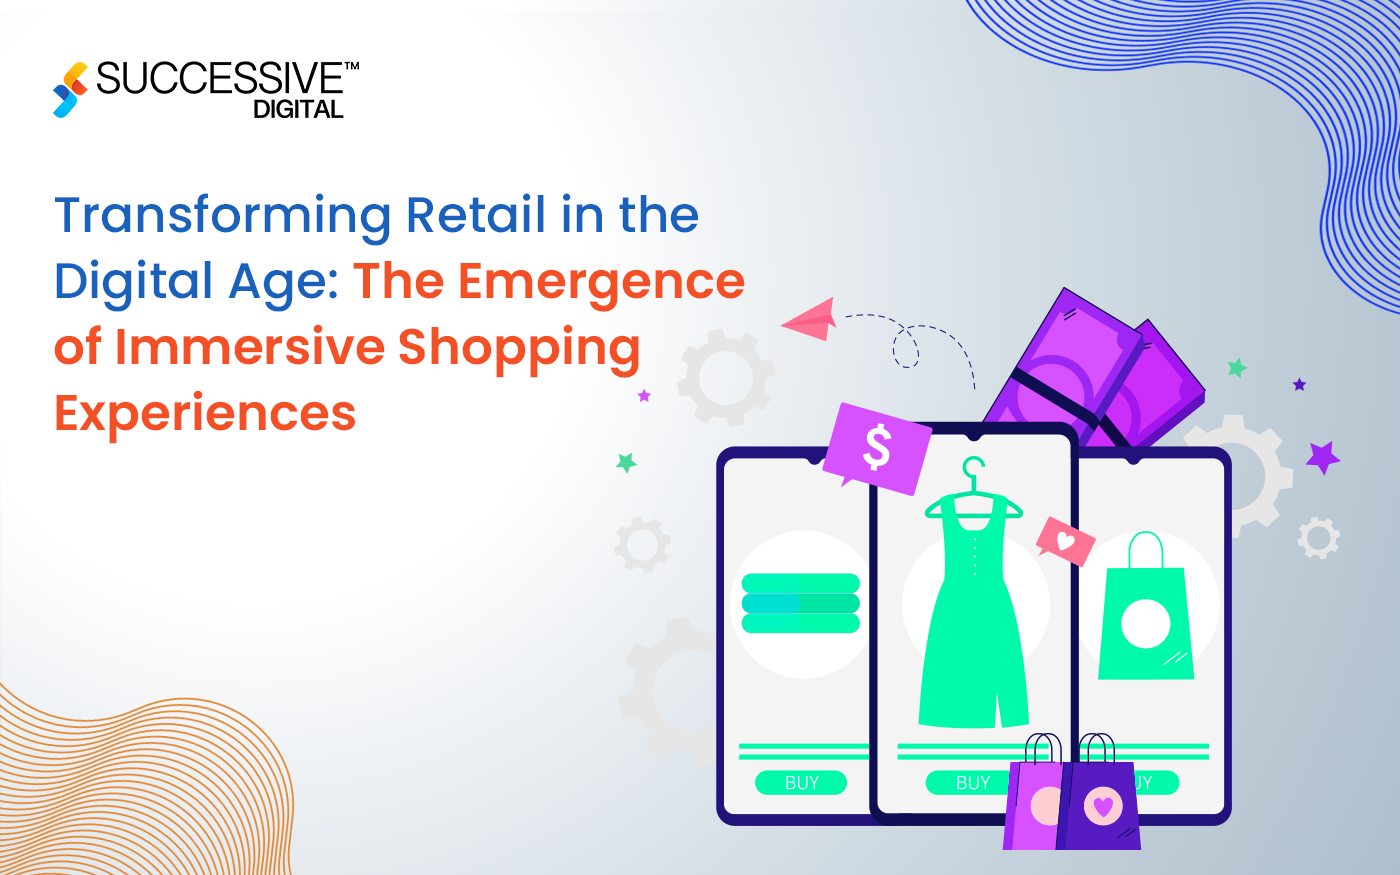 Transforming Retail in the Digital Age: The Emergence of Immersive Shopping Experiences